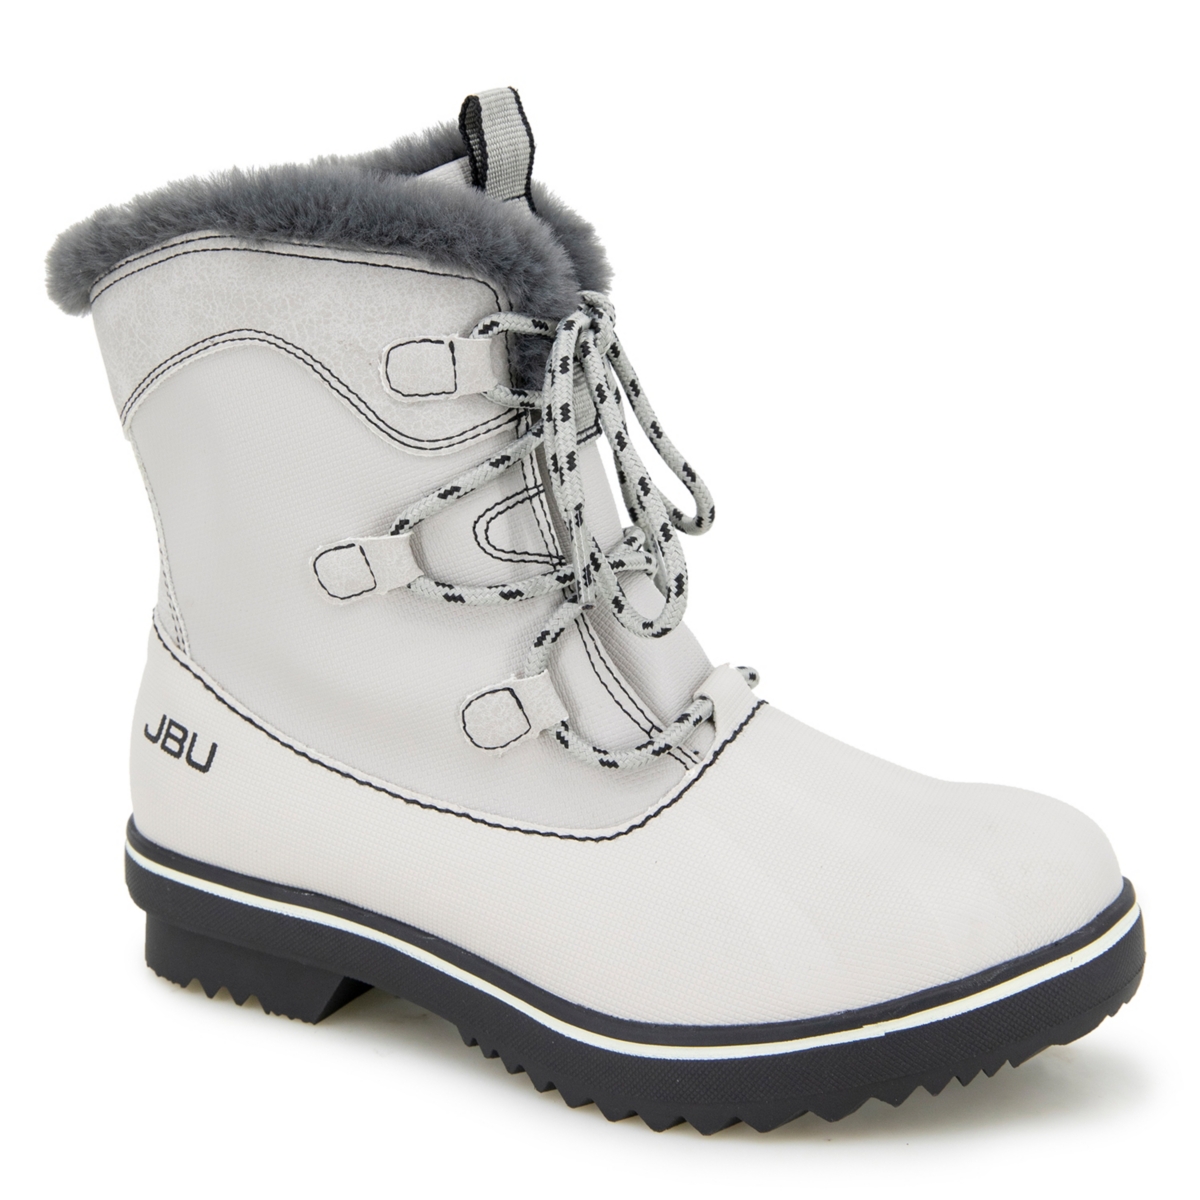 Brisky Lace-Up Casual Water-resistant Boots - Stone White